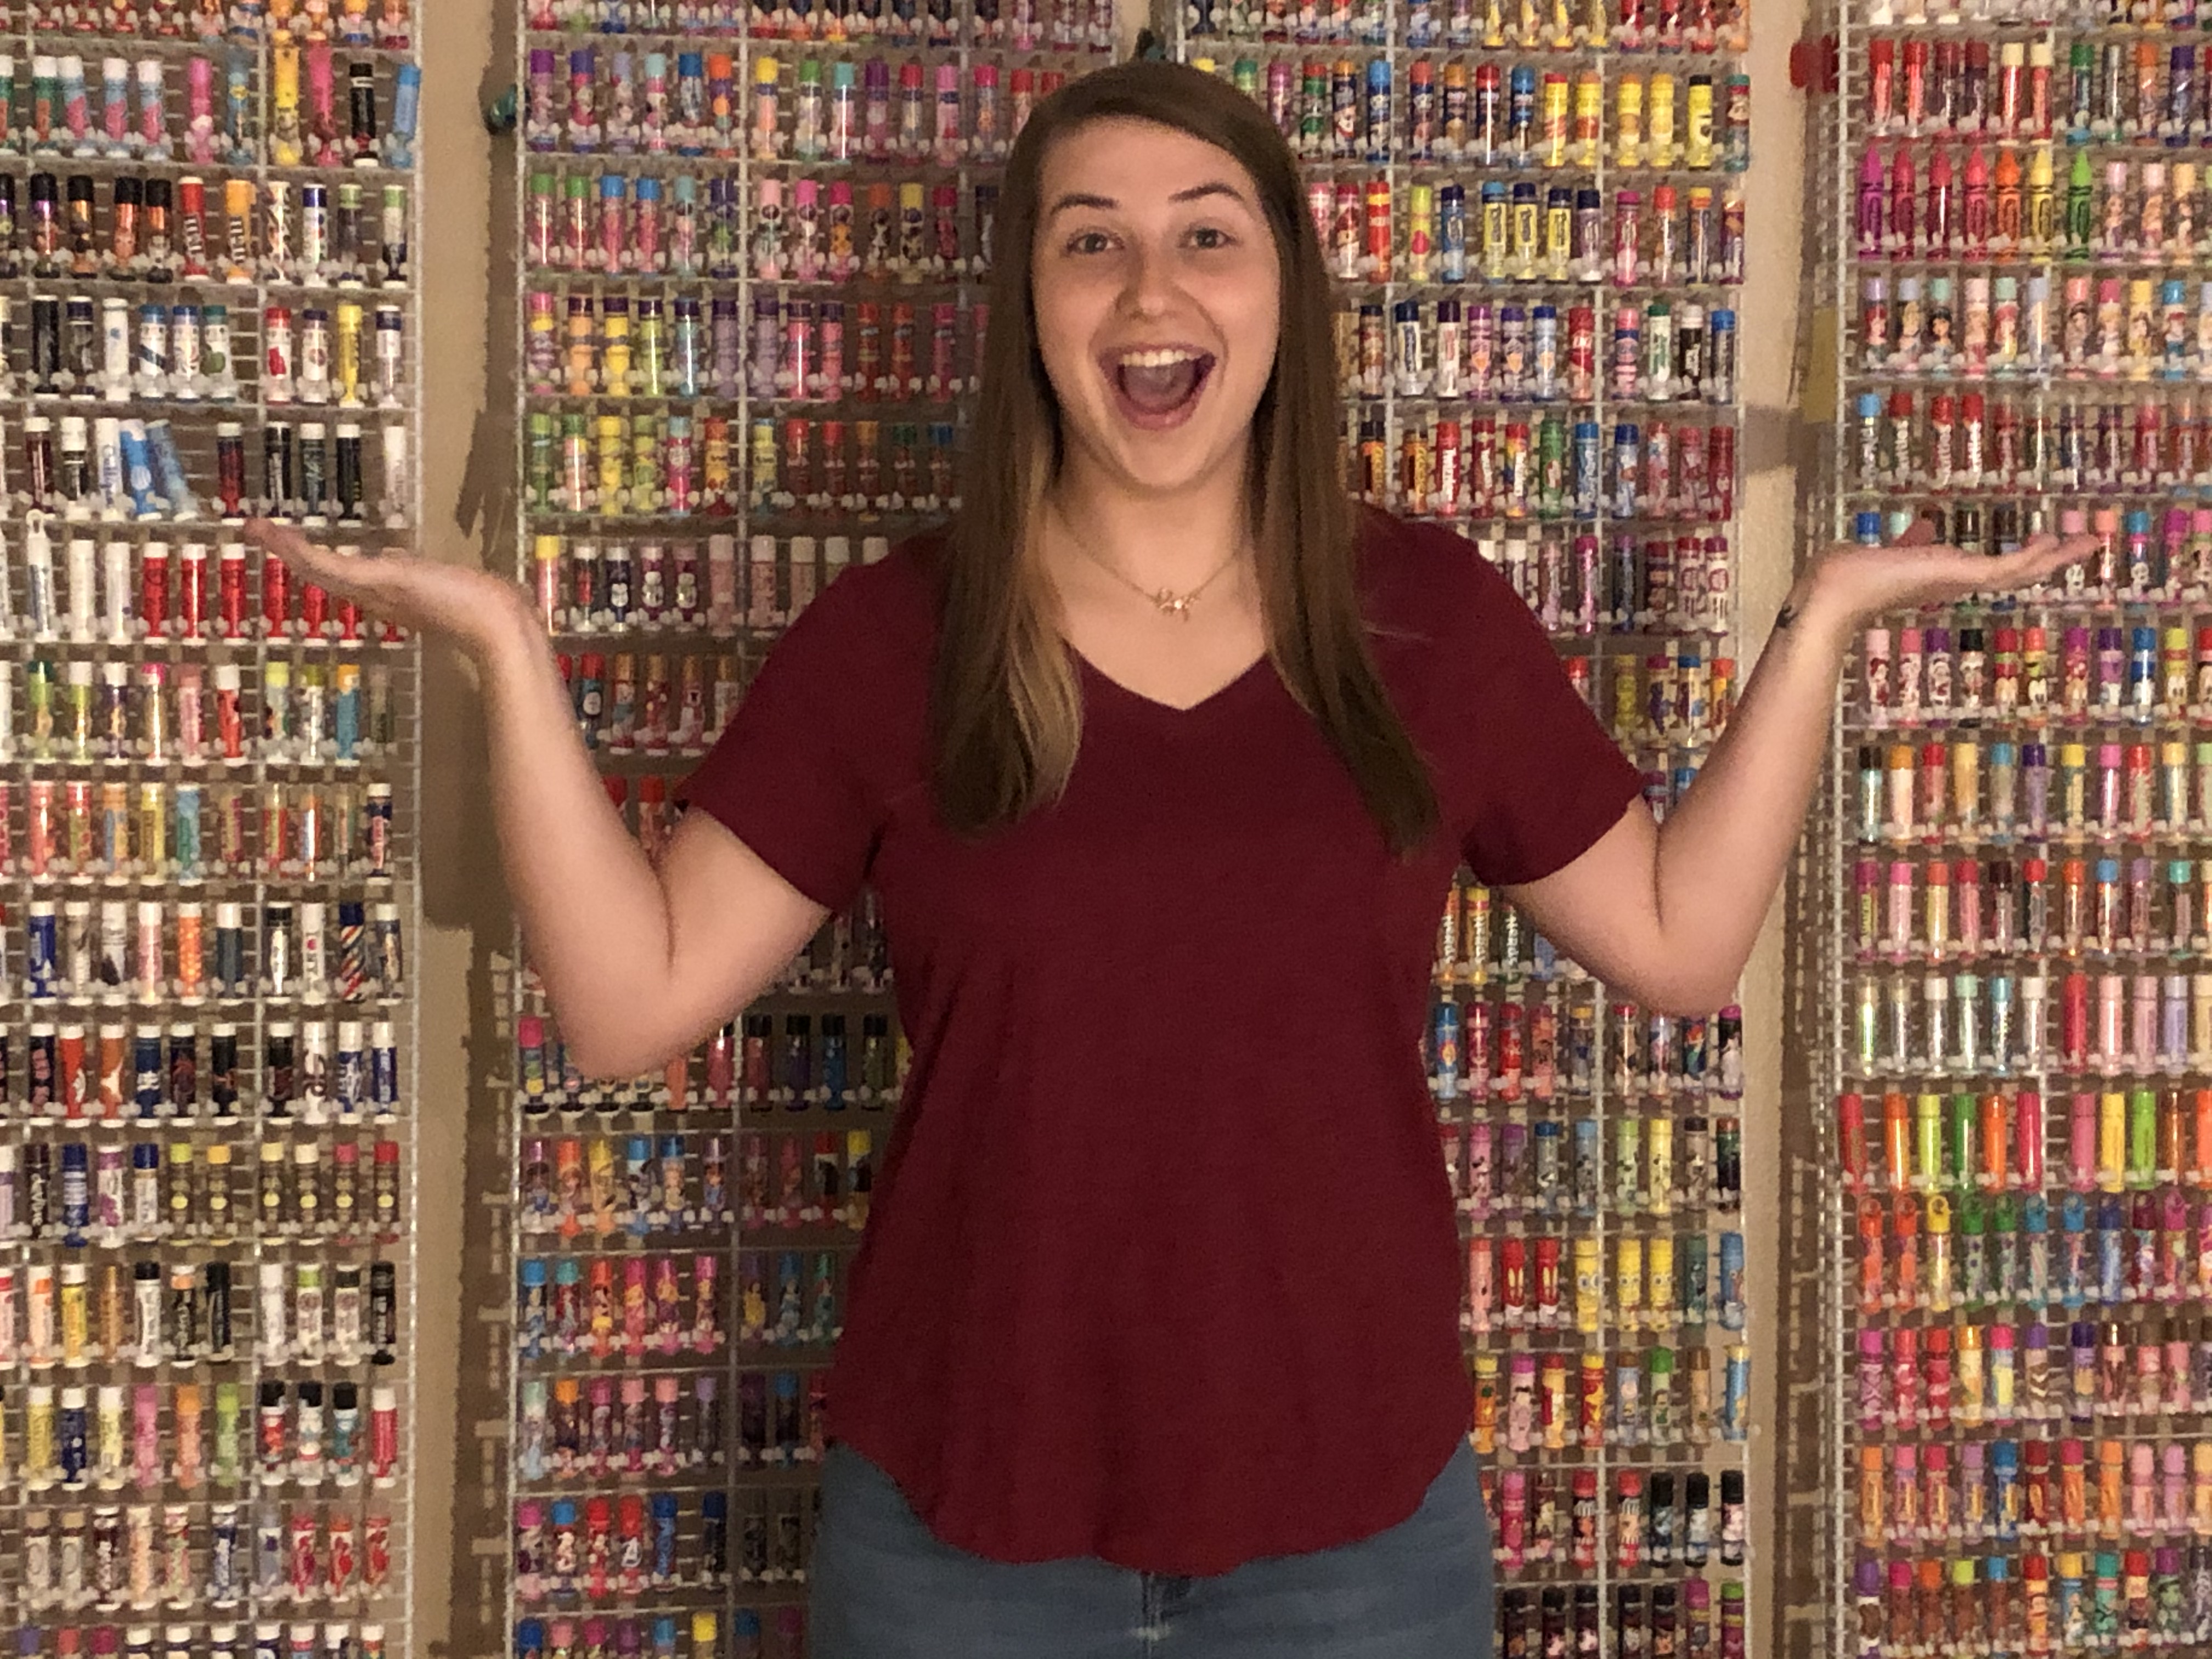 Lubbockite holds Guinness World record for largest lip balm collection